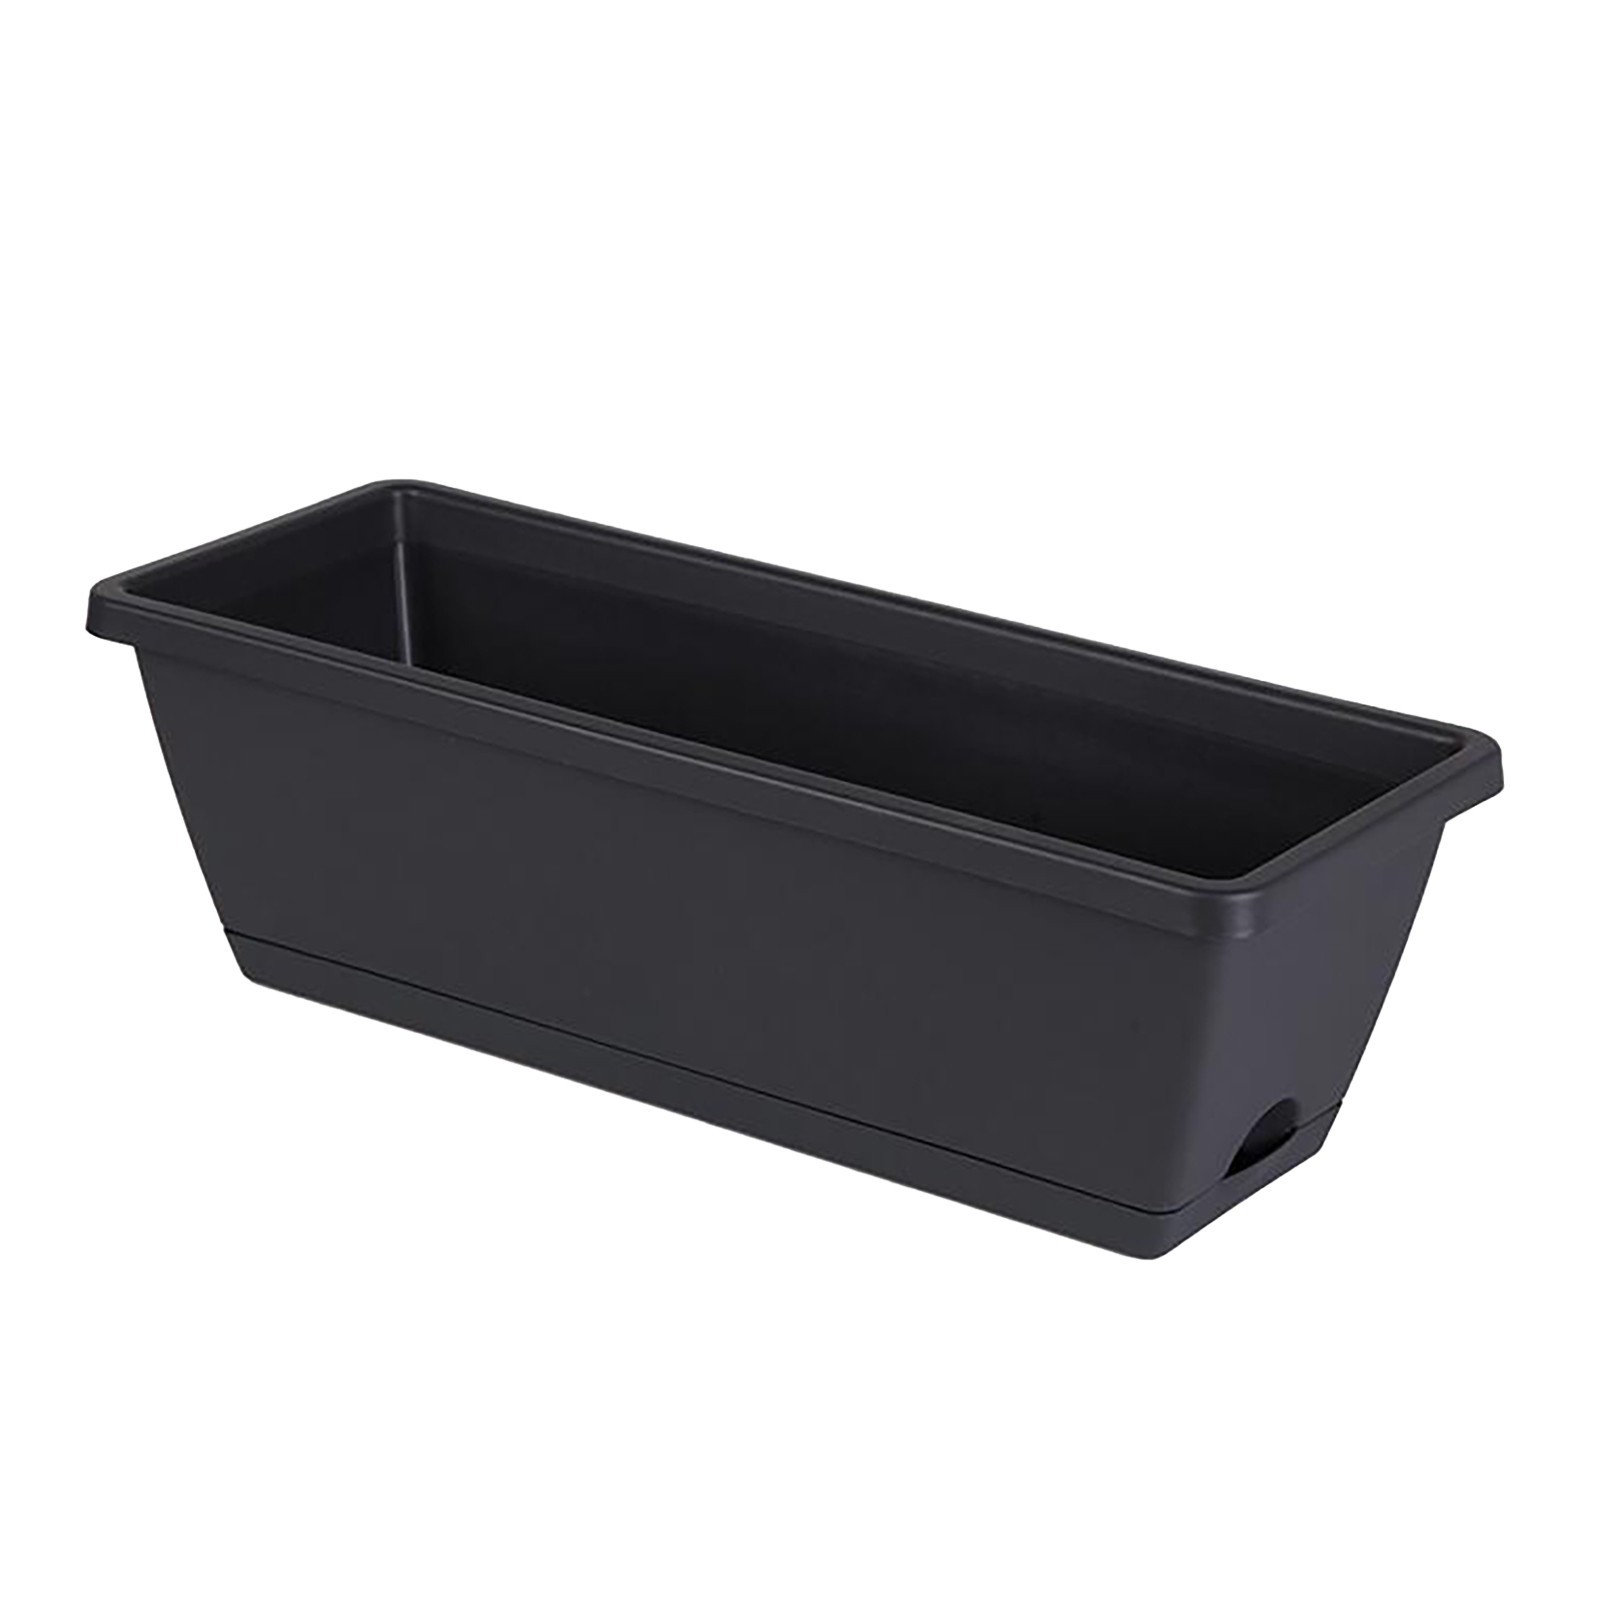 Wovilon Window Box Planter, Plastic Vegetable Flower Planters Boxes Rectangular Flower Pots with Saucers for Indoor Outdoor Garden, Patio, Home Decor - image 1 of 8